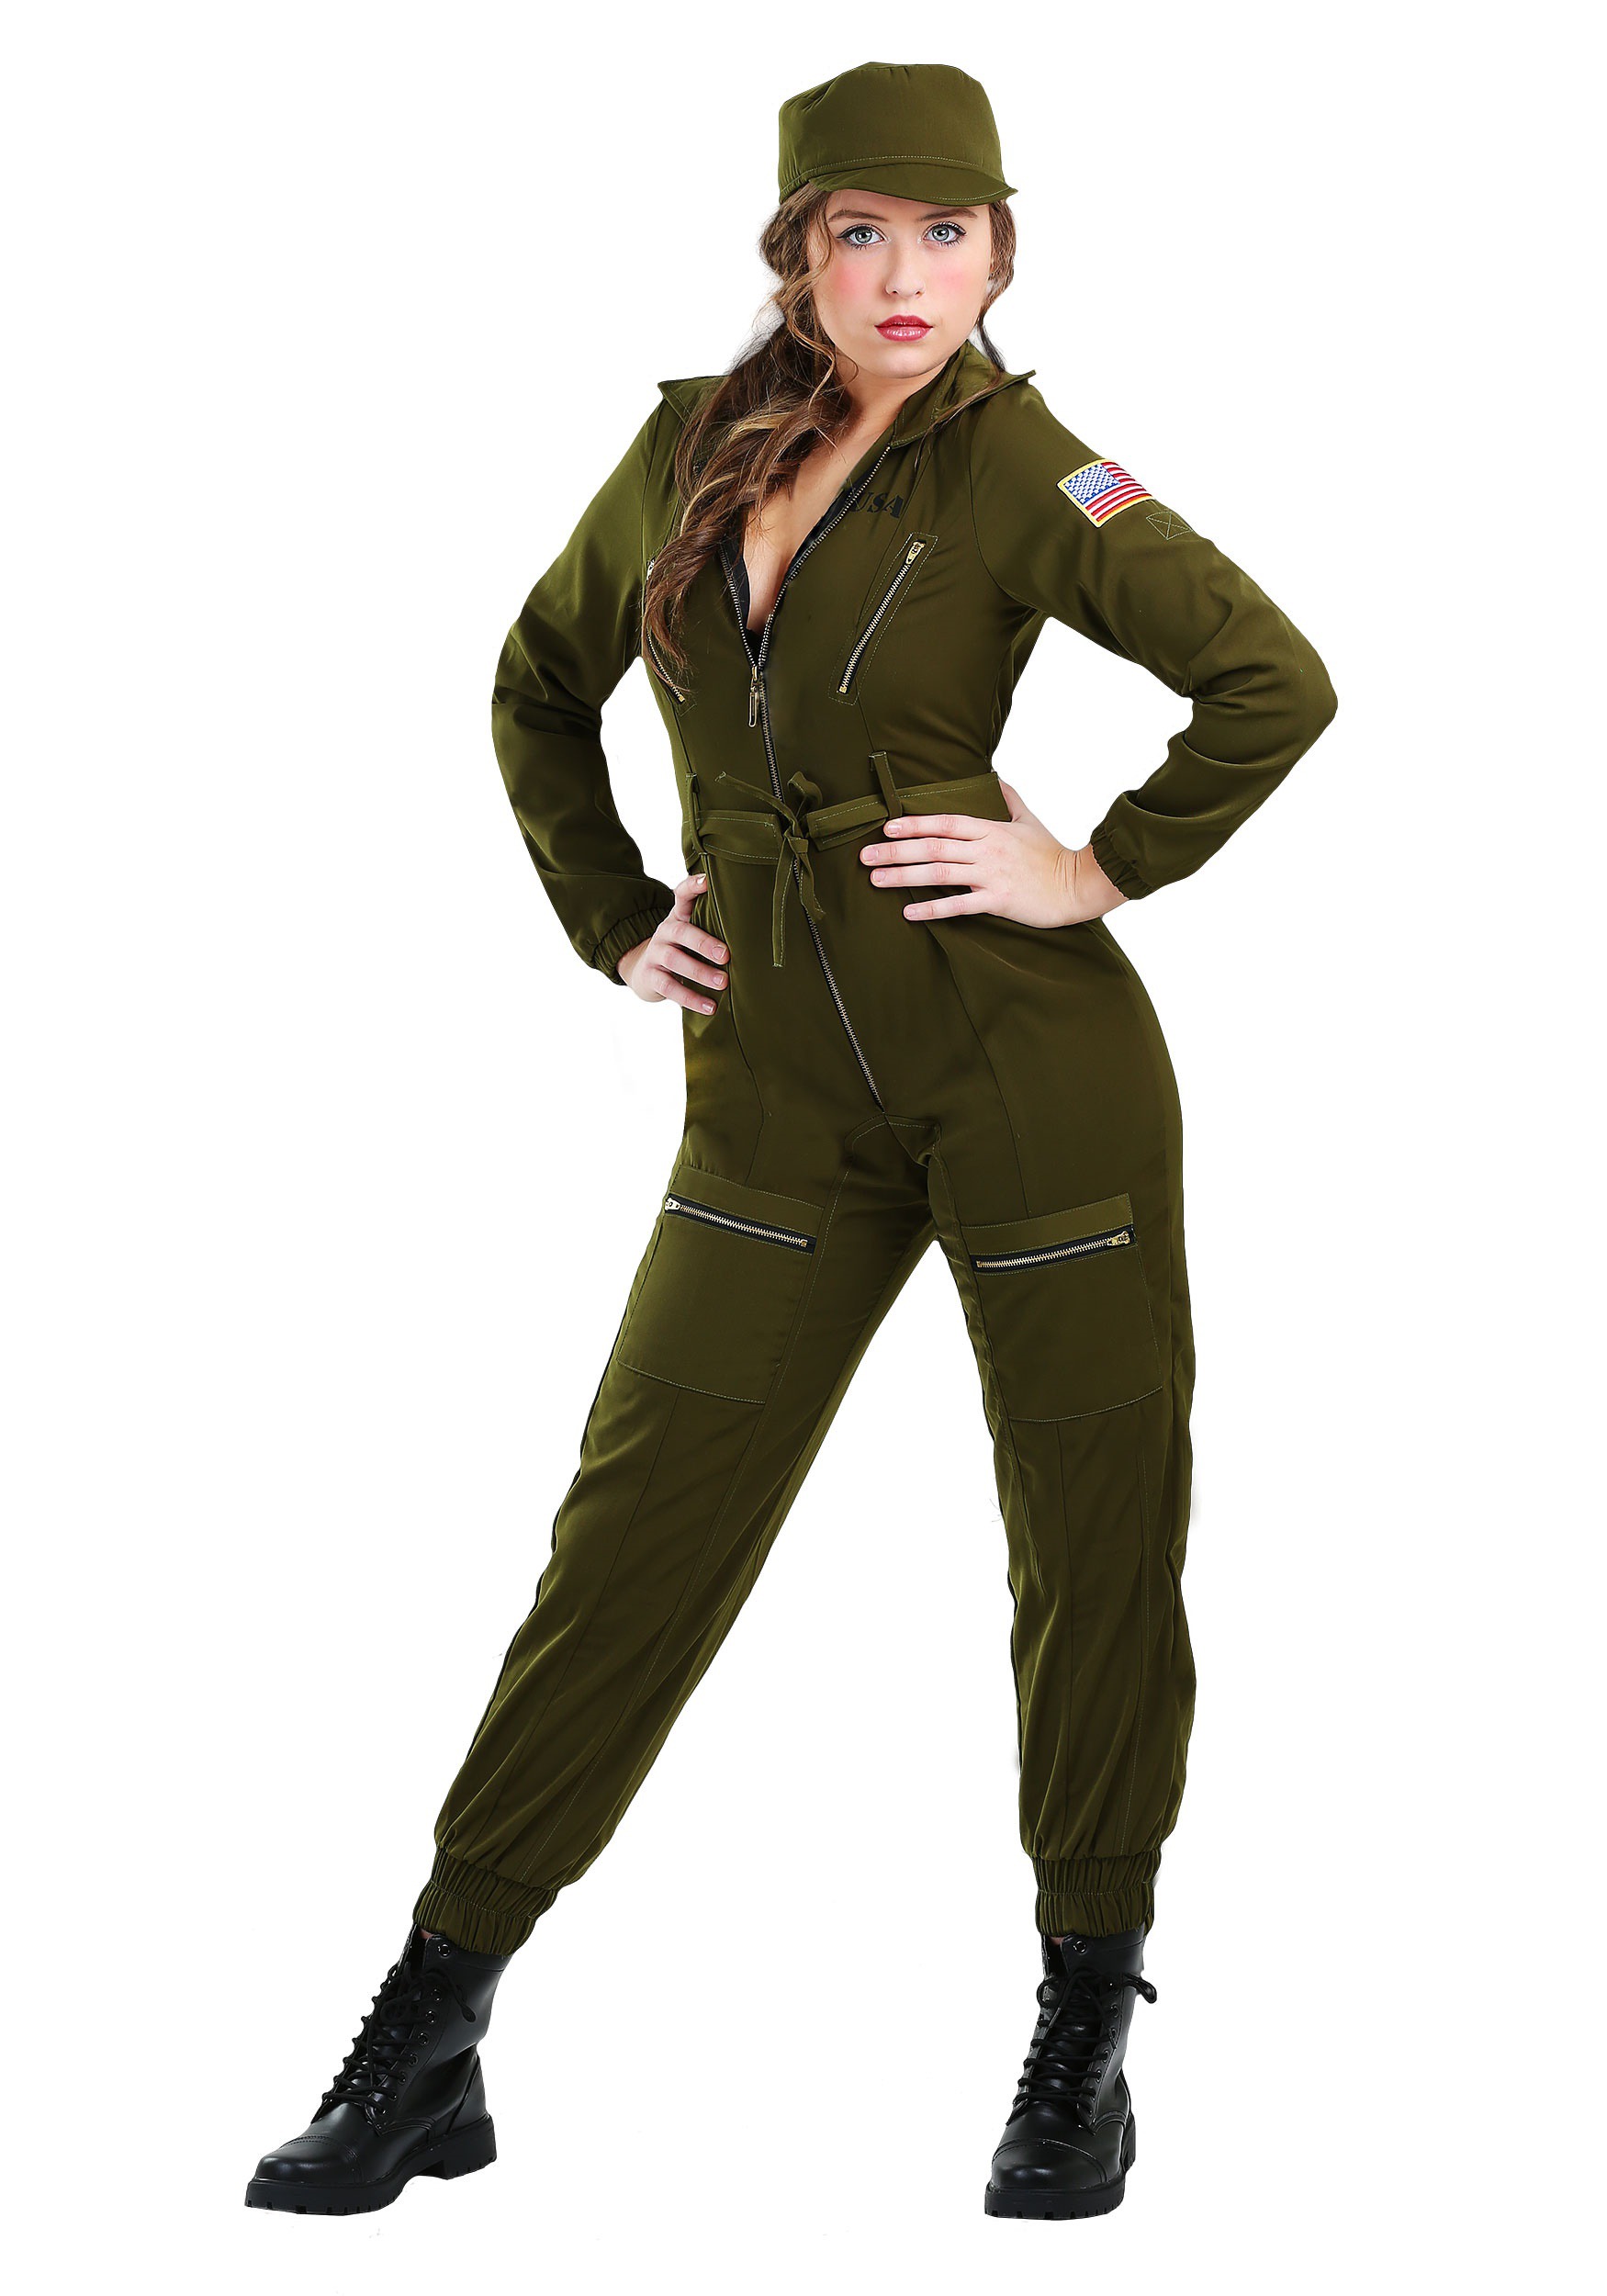 Army Flightsuit Costume for Adult Women